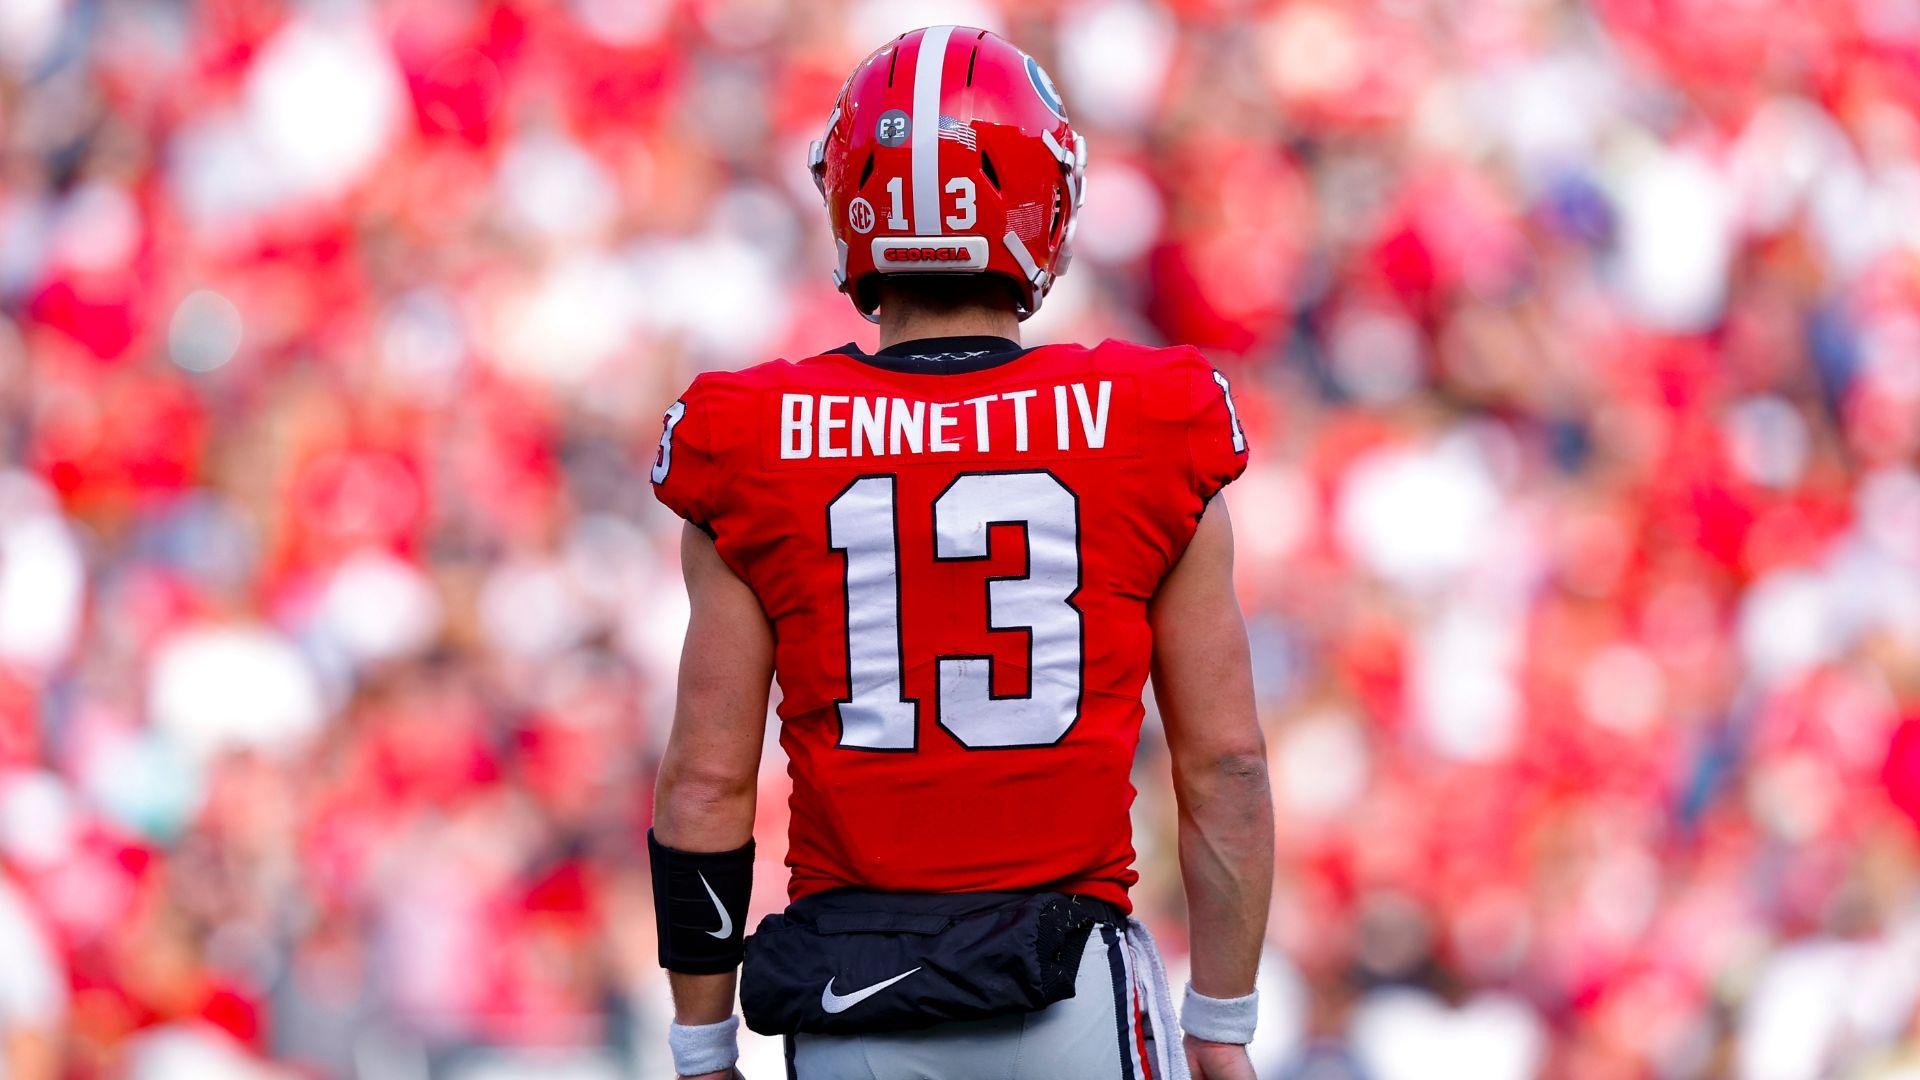 McGee Essay: Is Bennett the greatest Dawg ever?